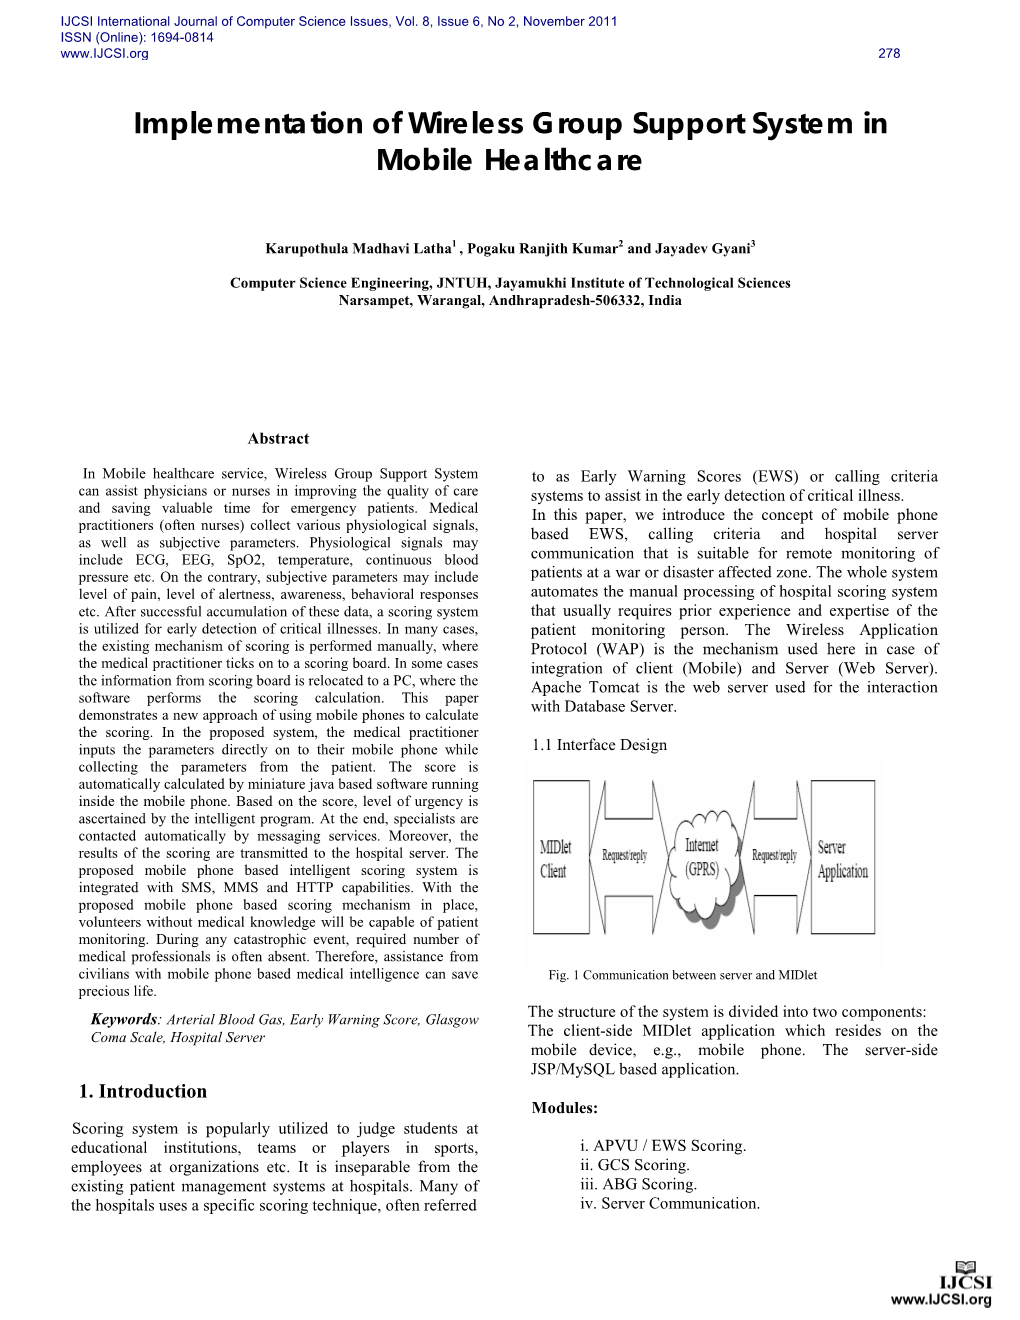 Implementation of Wireless Group Support System in Mobile Healthcare